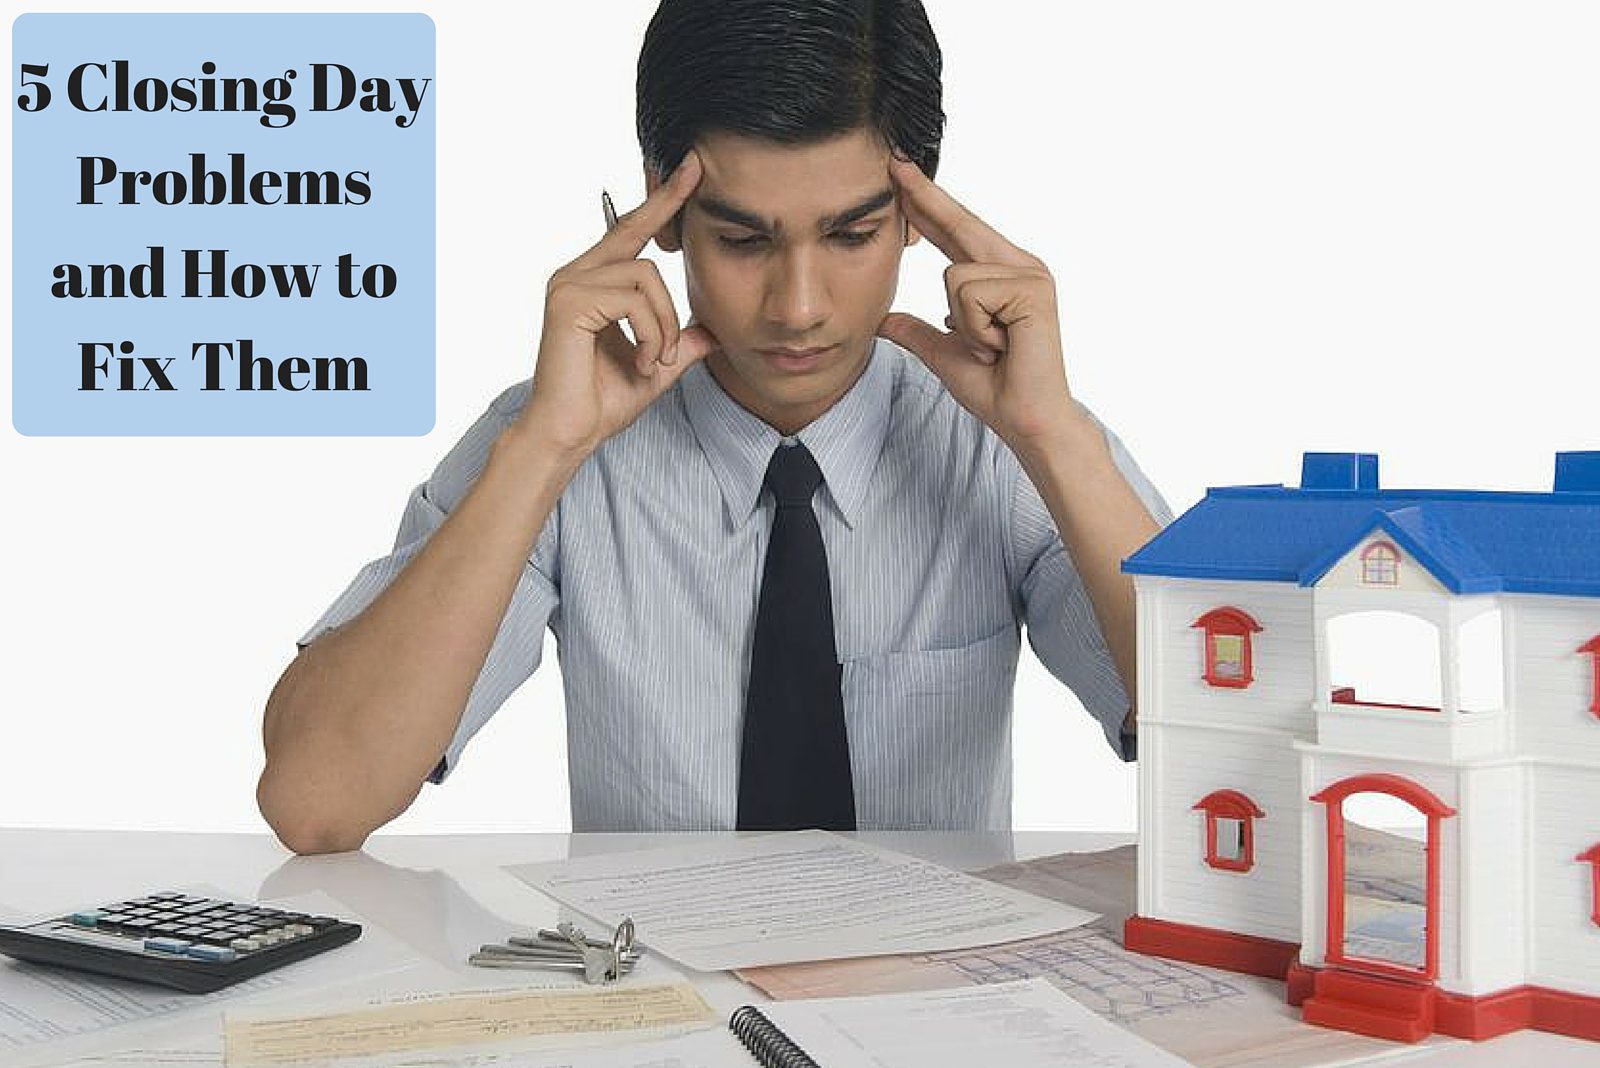 5 Closing Day Problems and How to Fix Them